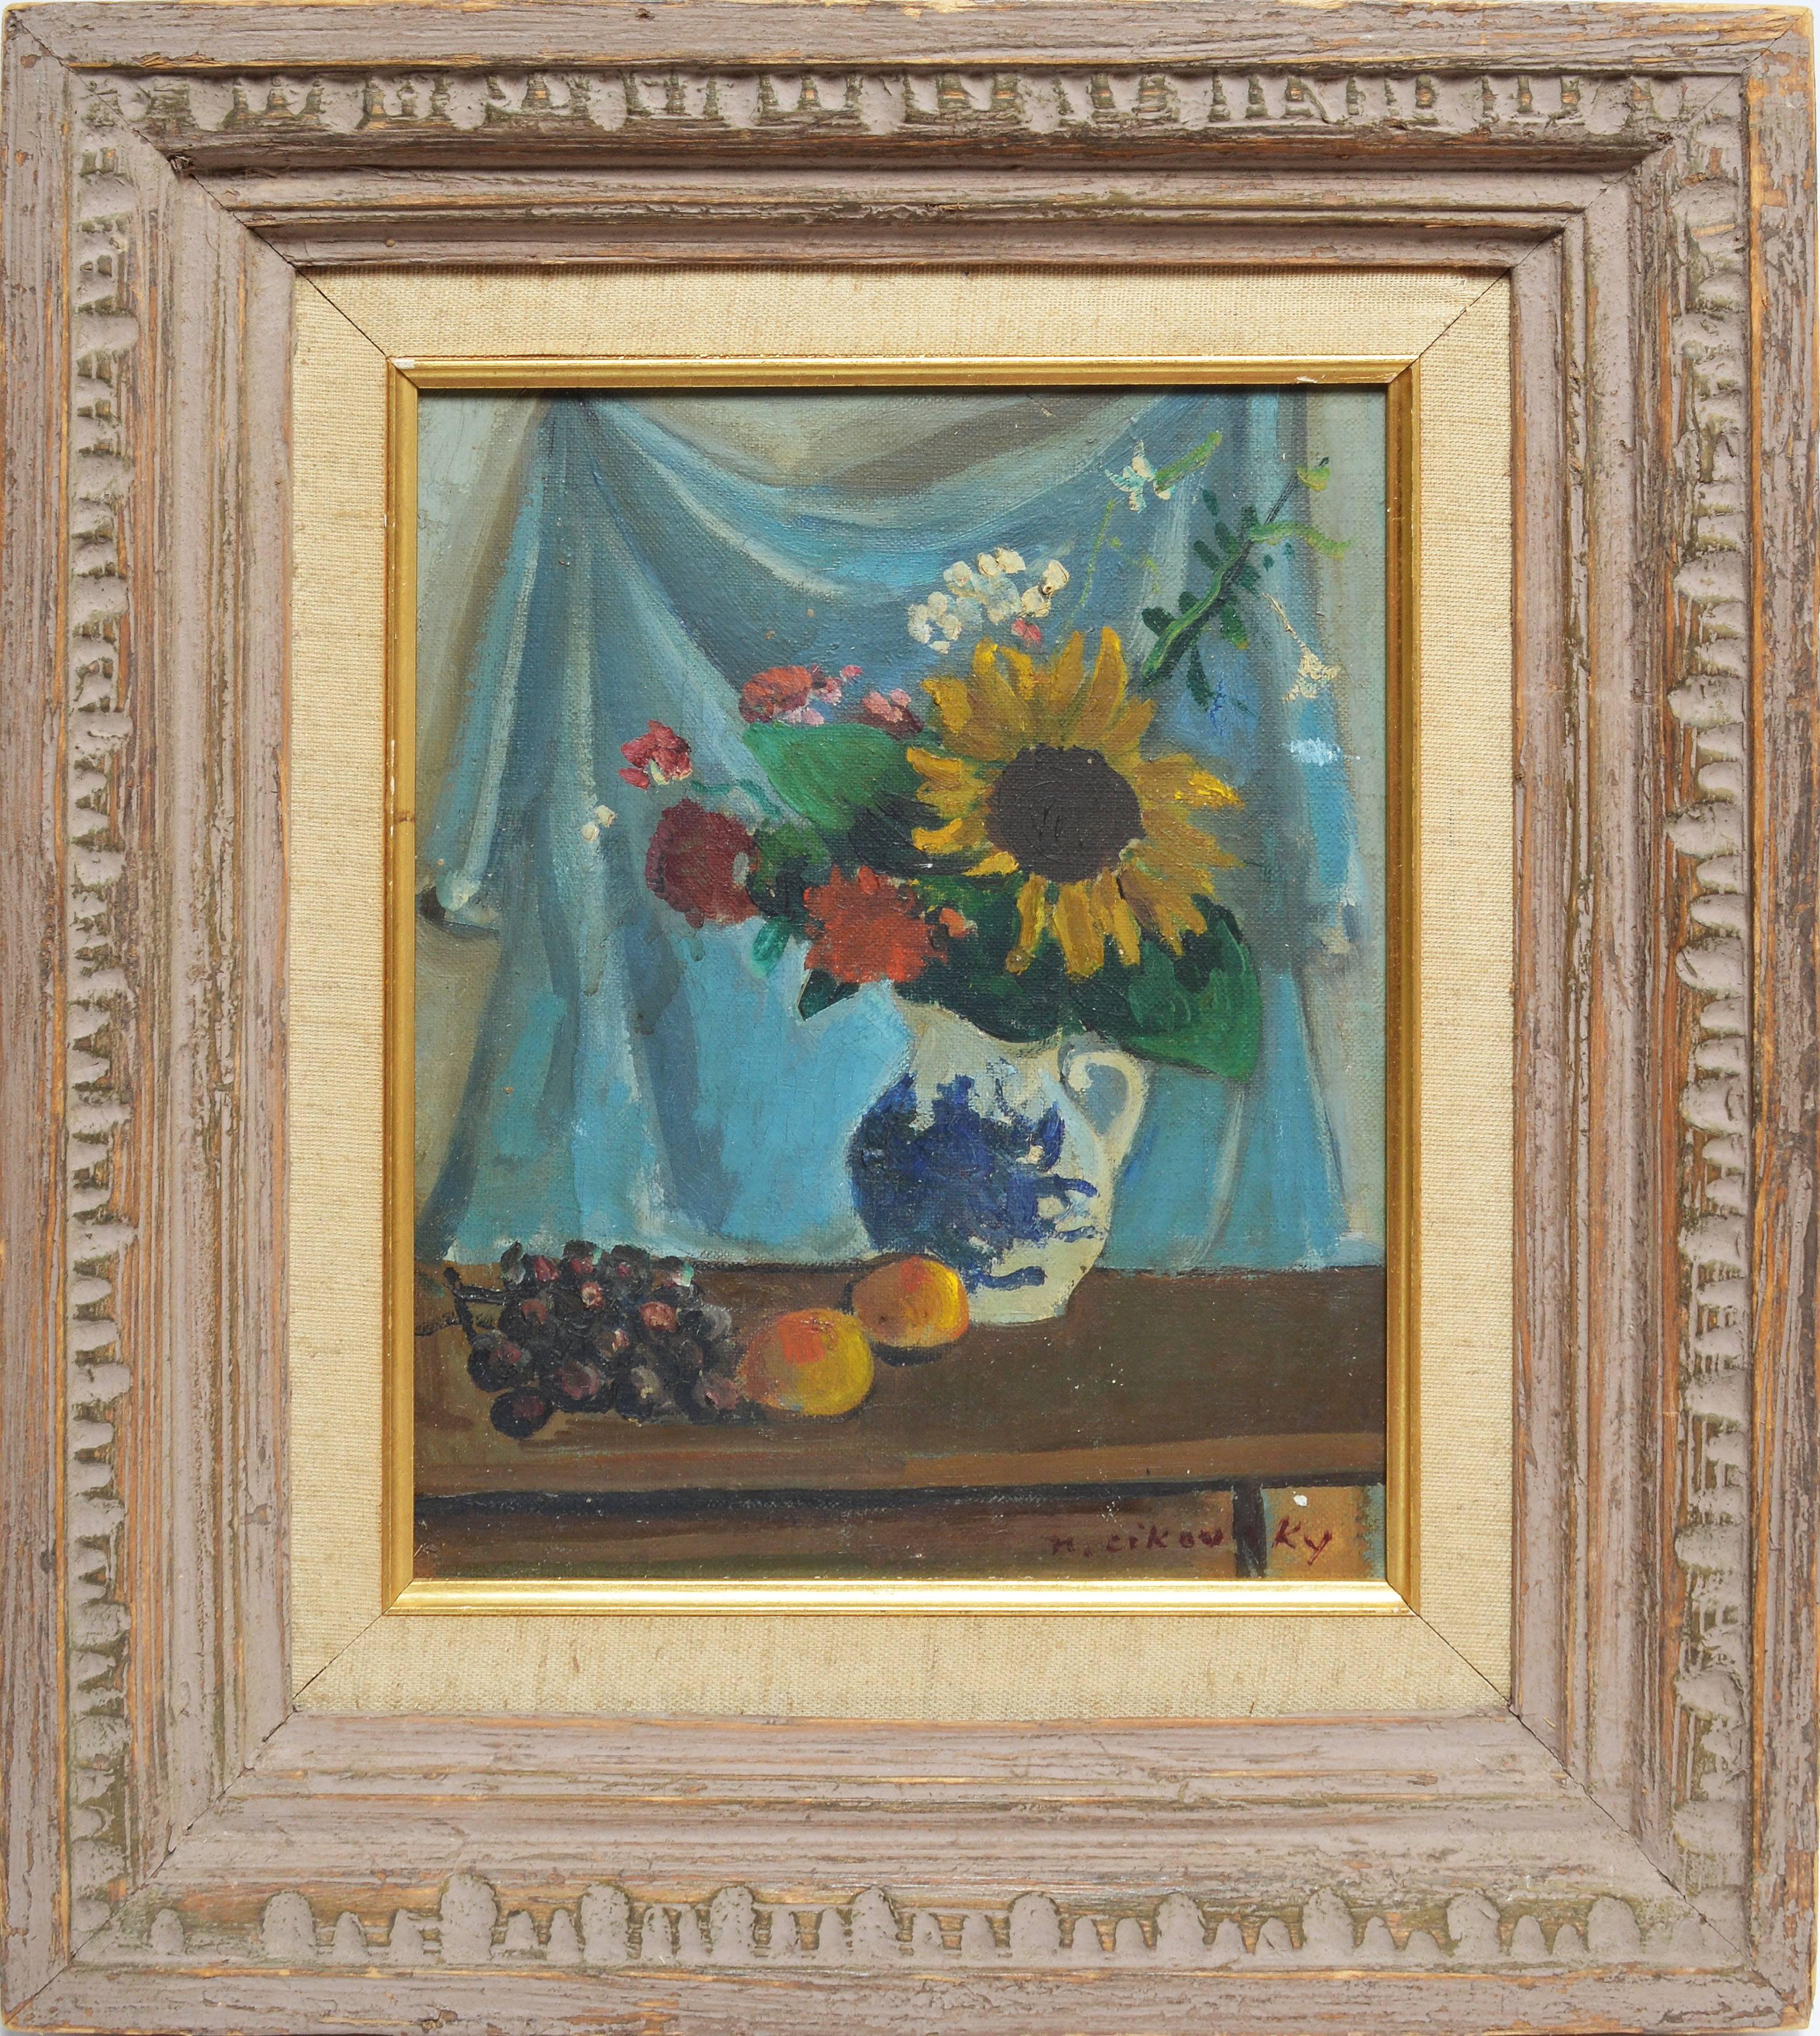 Impressionist flower still life by Nicolai Cikovsky (1894-1984).  Oil on canvas, circa 1940.  Signed lower left, "N. Cikovsky".  Displayed in a period modernist frame.  Image size, 8"L x 10"H, overall 13"L x 15"H.